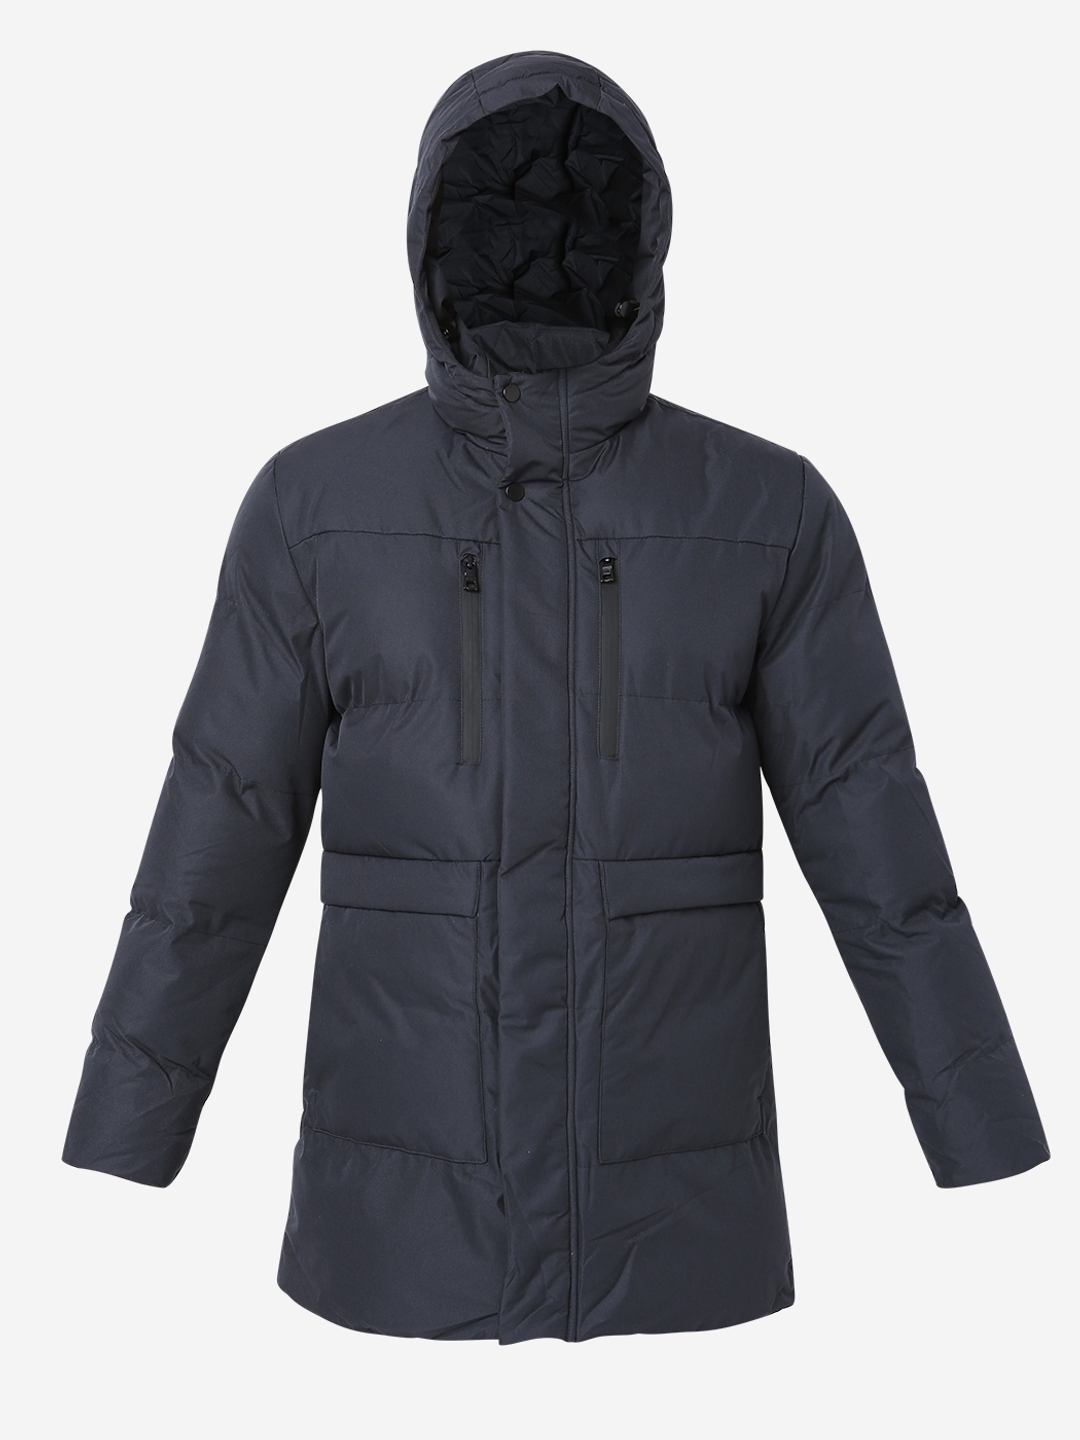 Byron Zip-Front Hooded Jacket